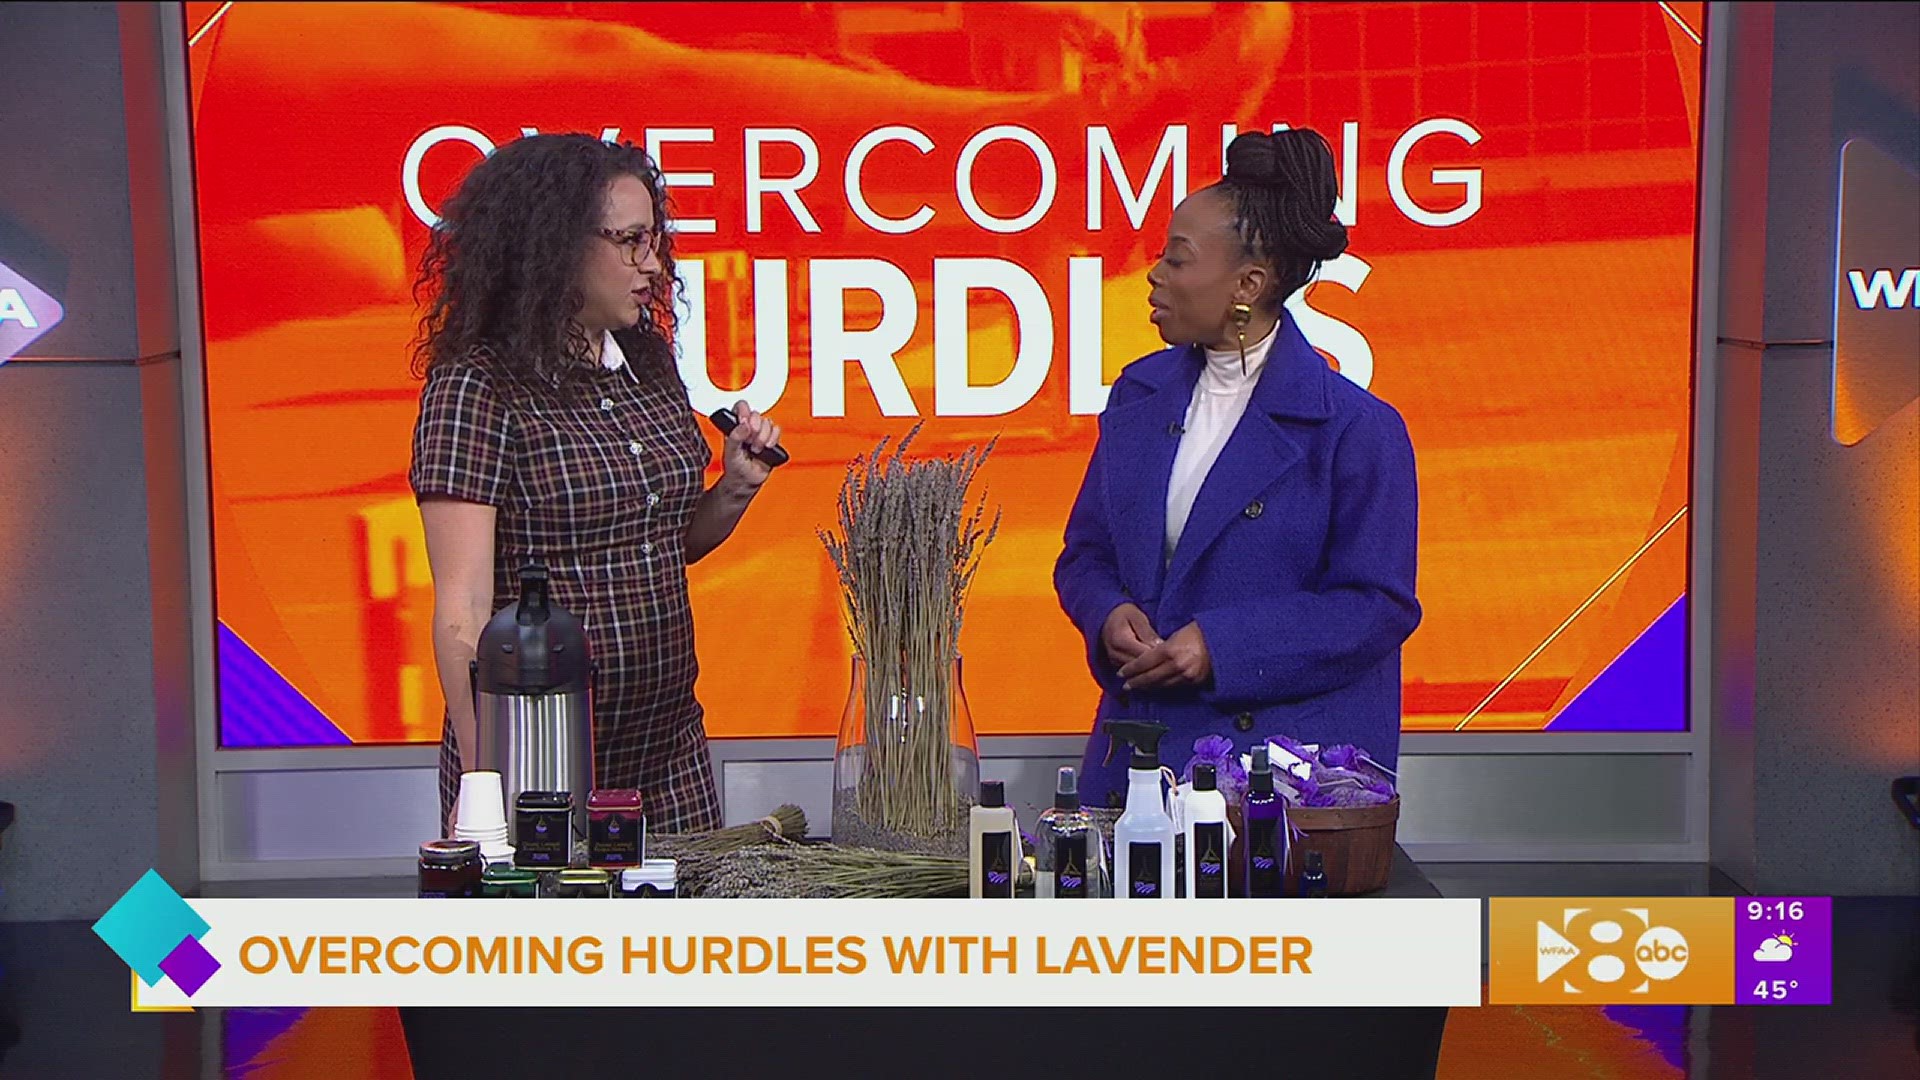 Belinda Bush shares how lavender helps her to keep calm and overcome challenges. Go to @texaslavenderlux for more information.